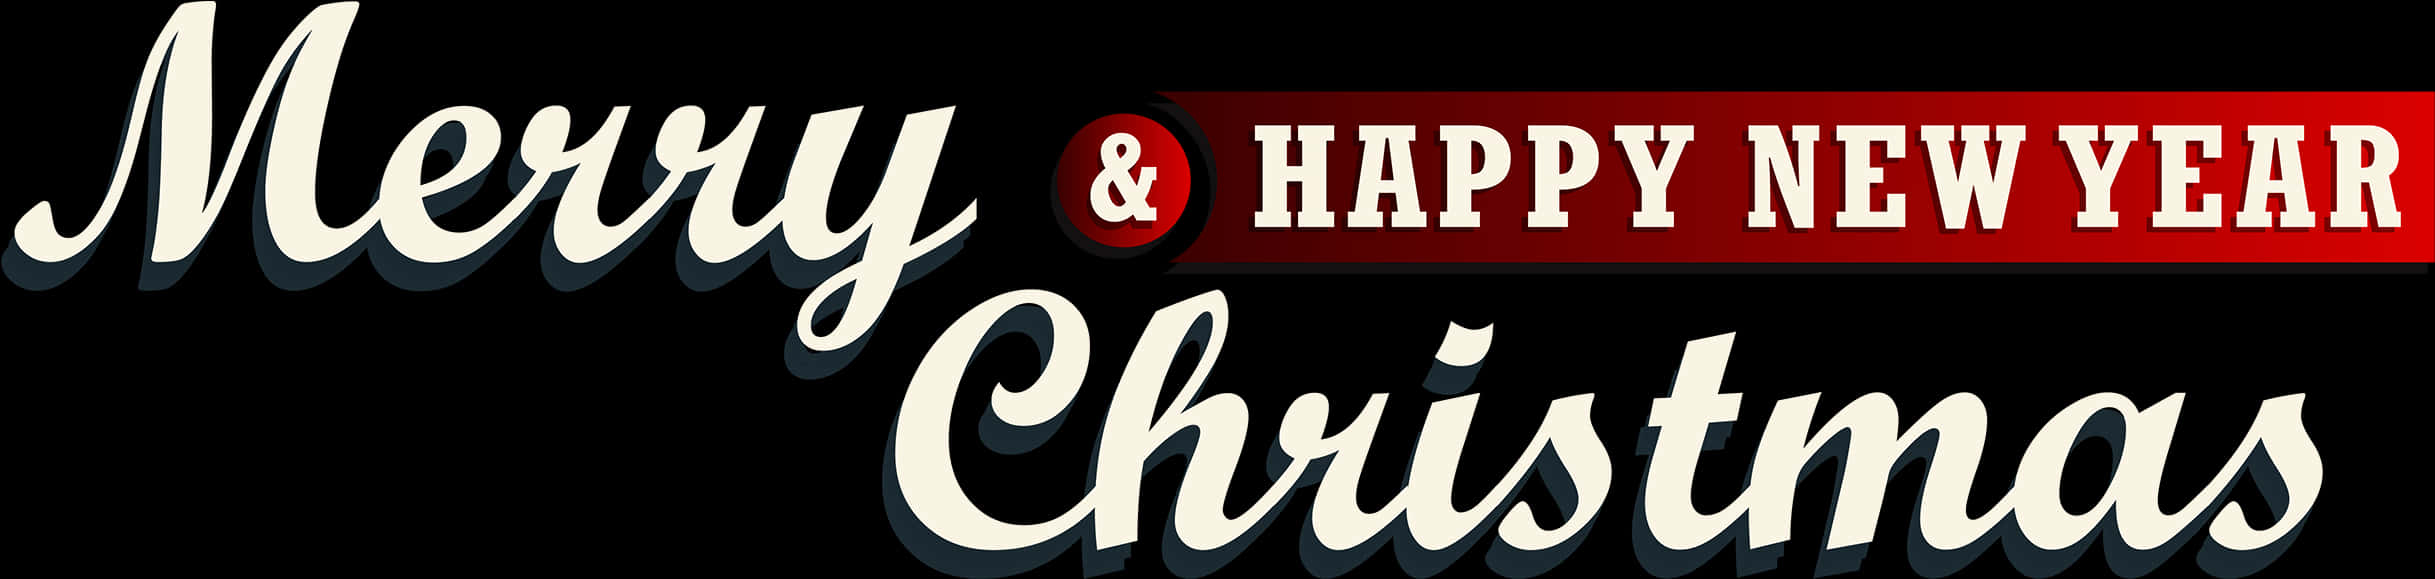 Merry Christmas Happy New Year Banner PNG